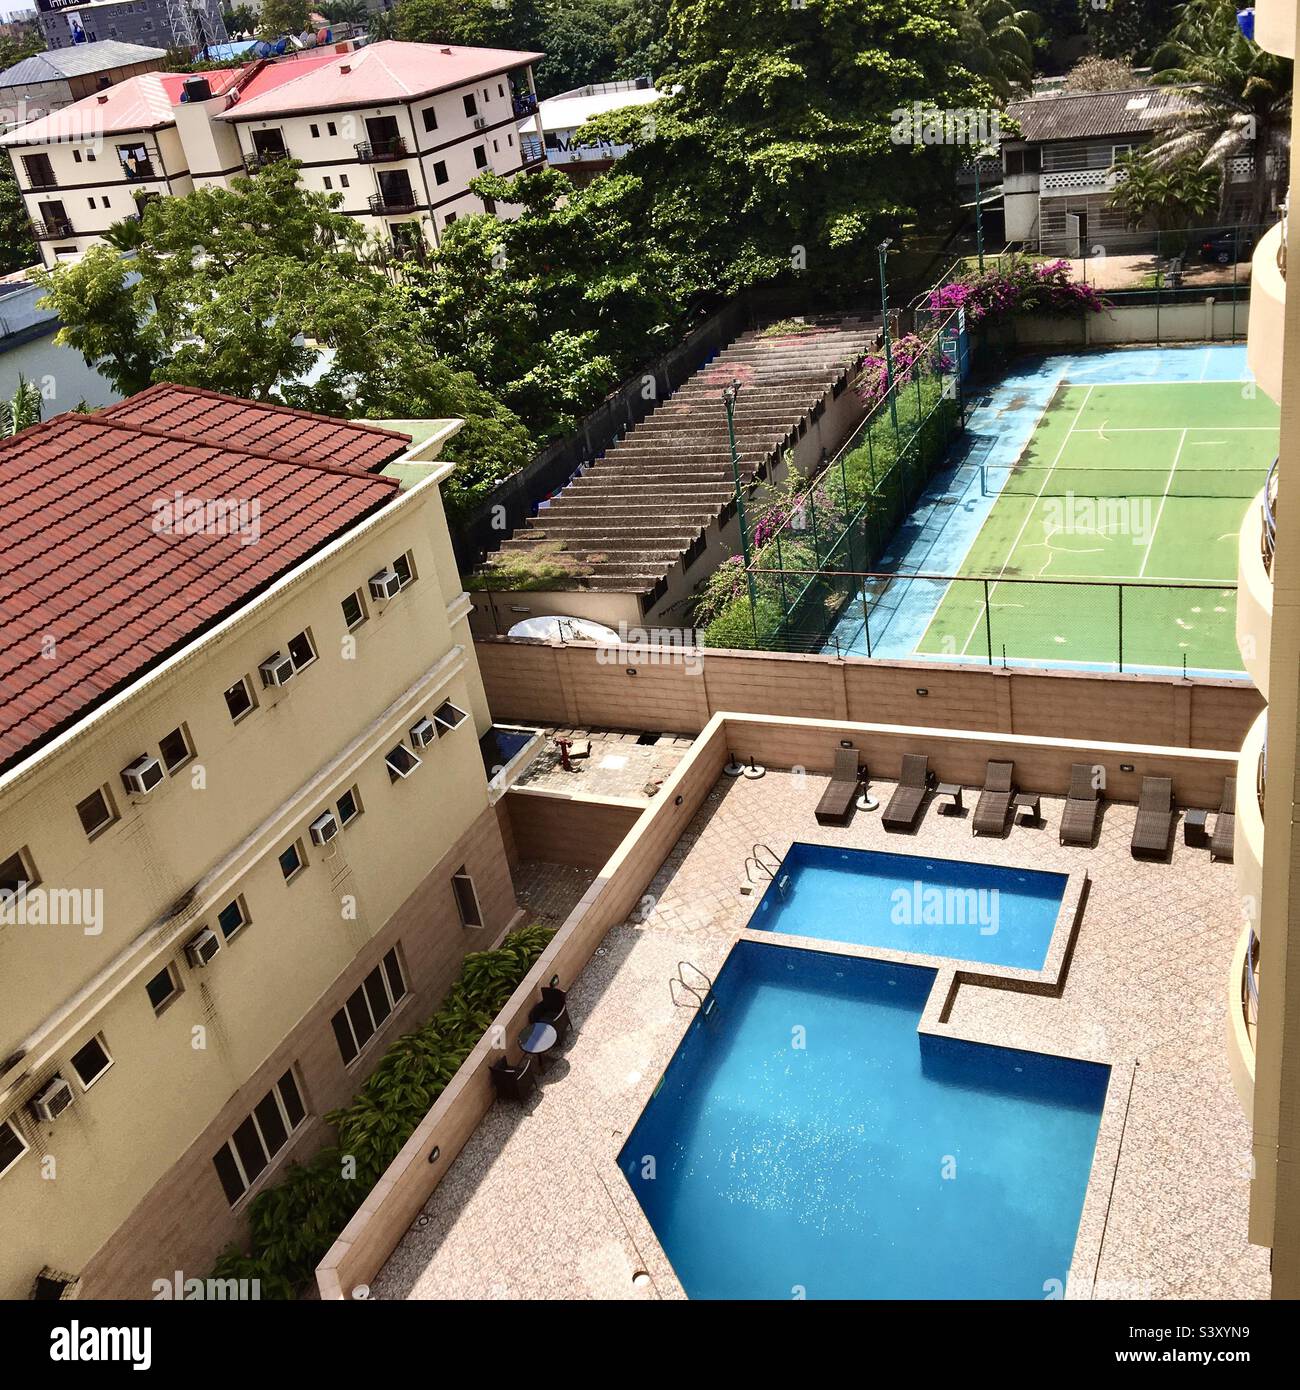 A very good looking view of buildings and it’s environ with pool,a tennis court,trees and greens Stock Photo